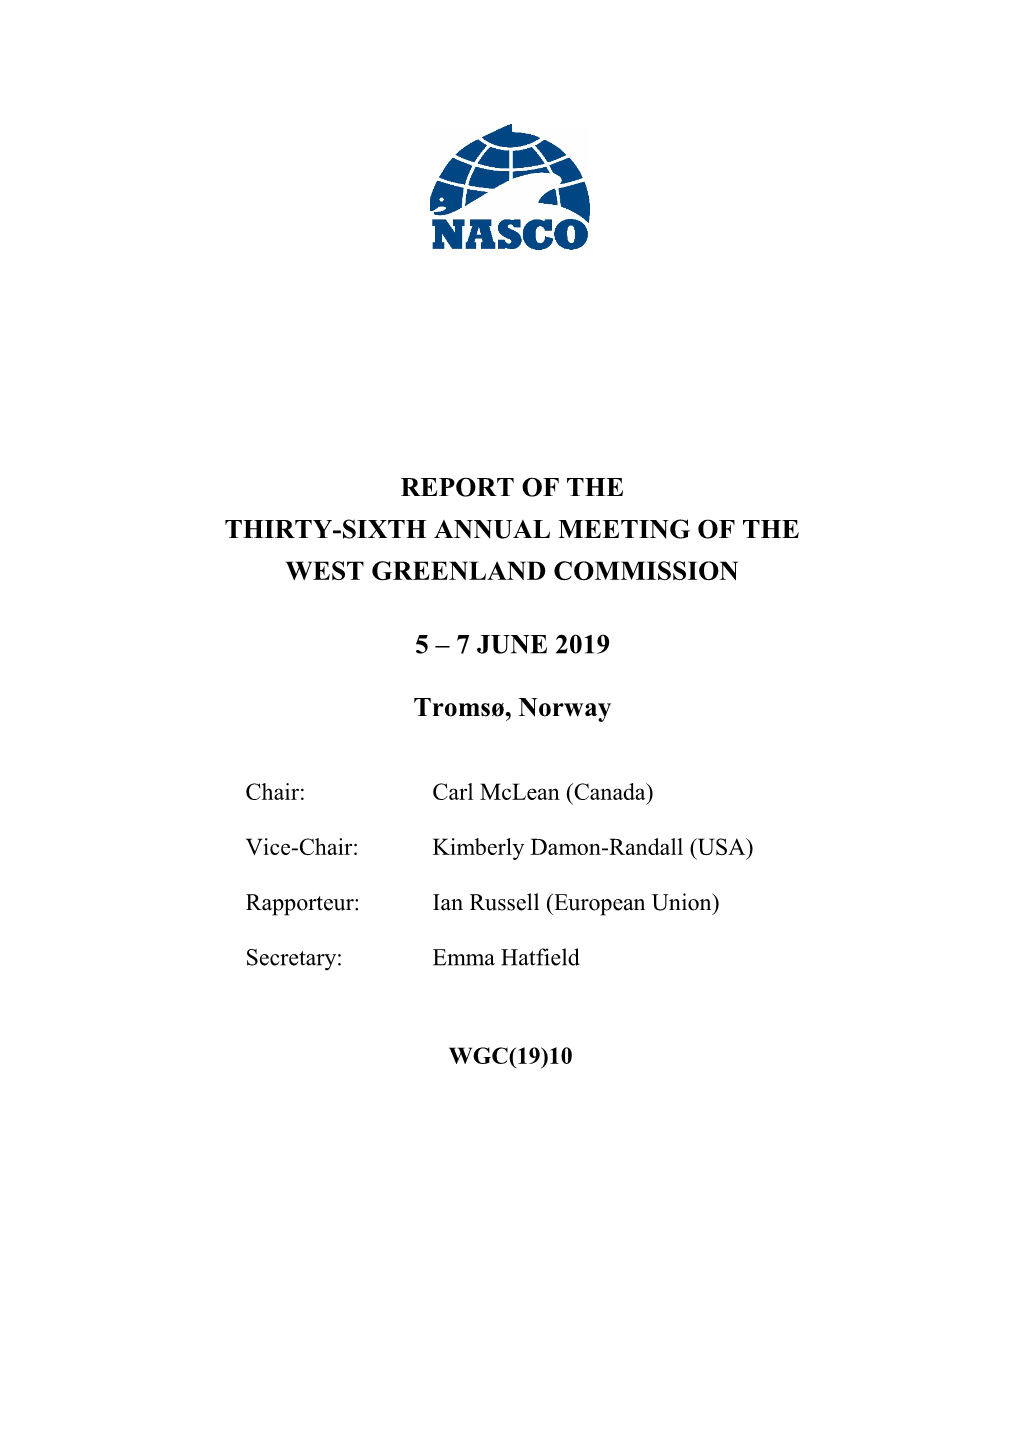 REPORT of the THIRTY-SIXTH ANNUAL MEETING of the WEST GREENLAND COMMISSION 5 – 7 JUNE 2019 Tromsø, Norway